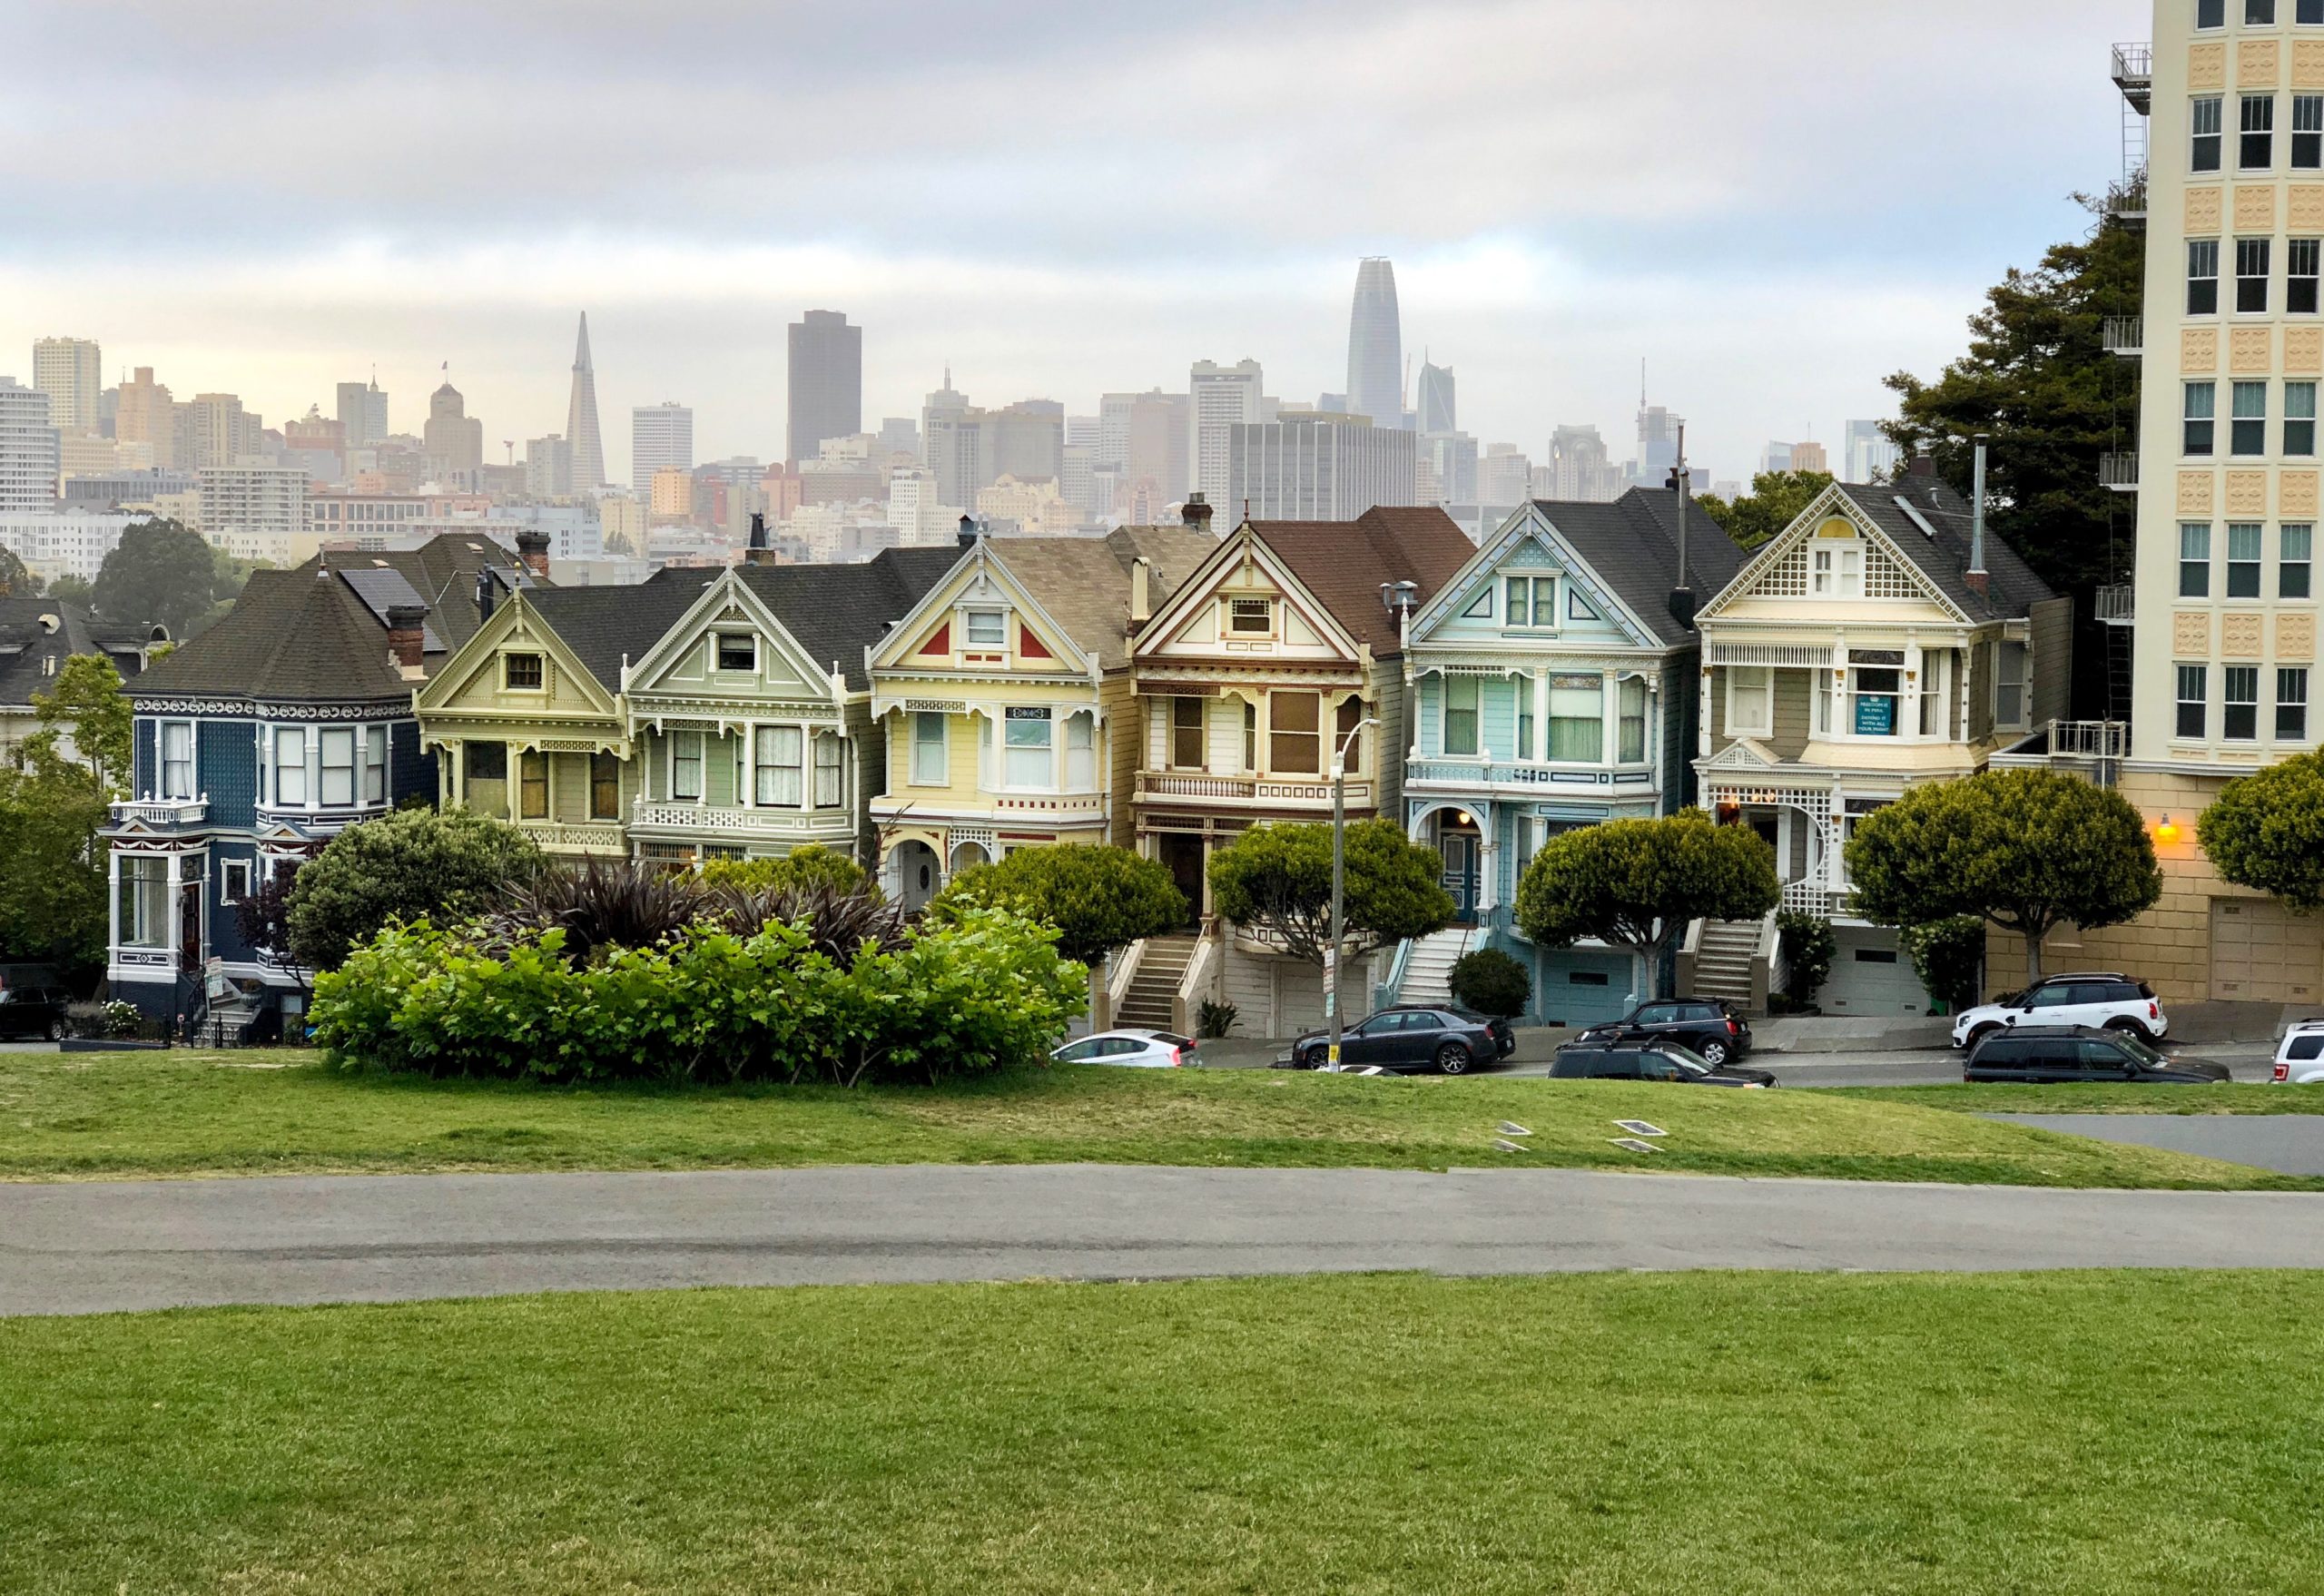 line of homes in san francisco with grassy common ground area